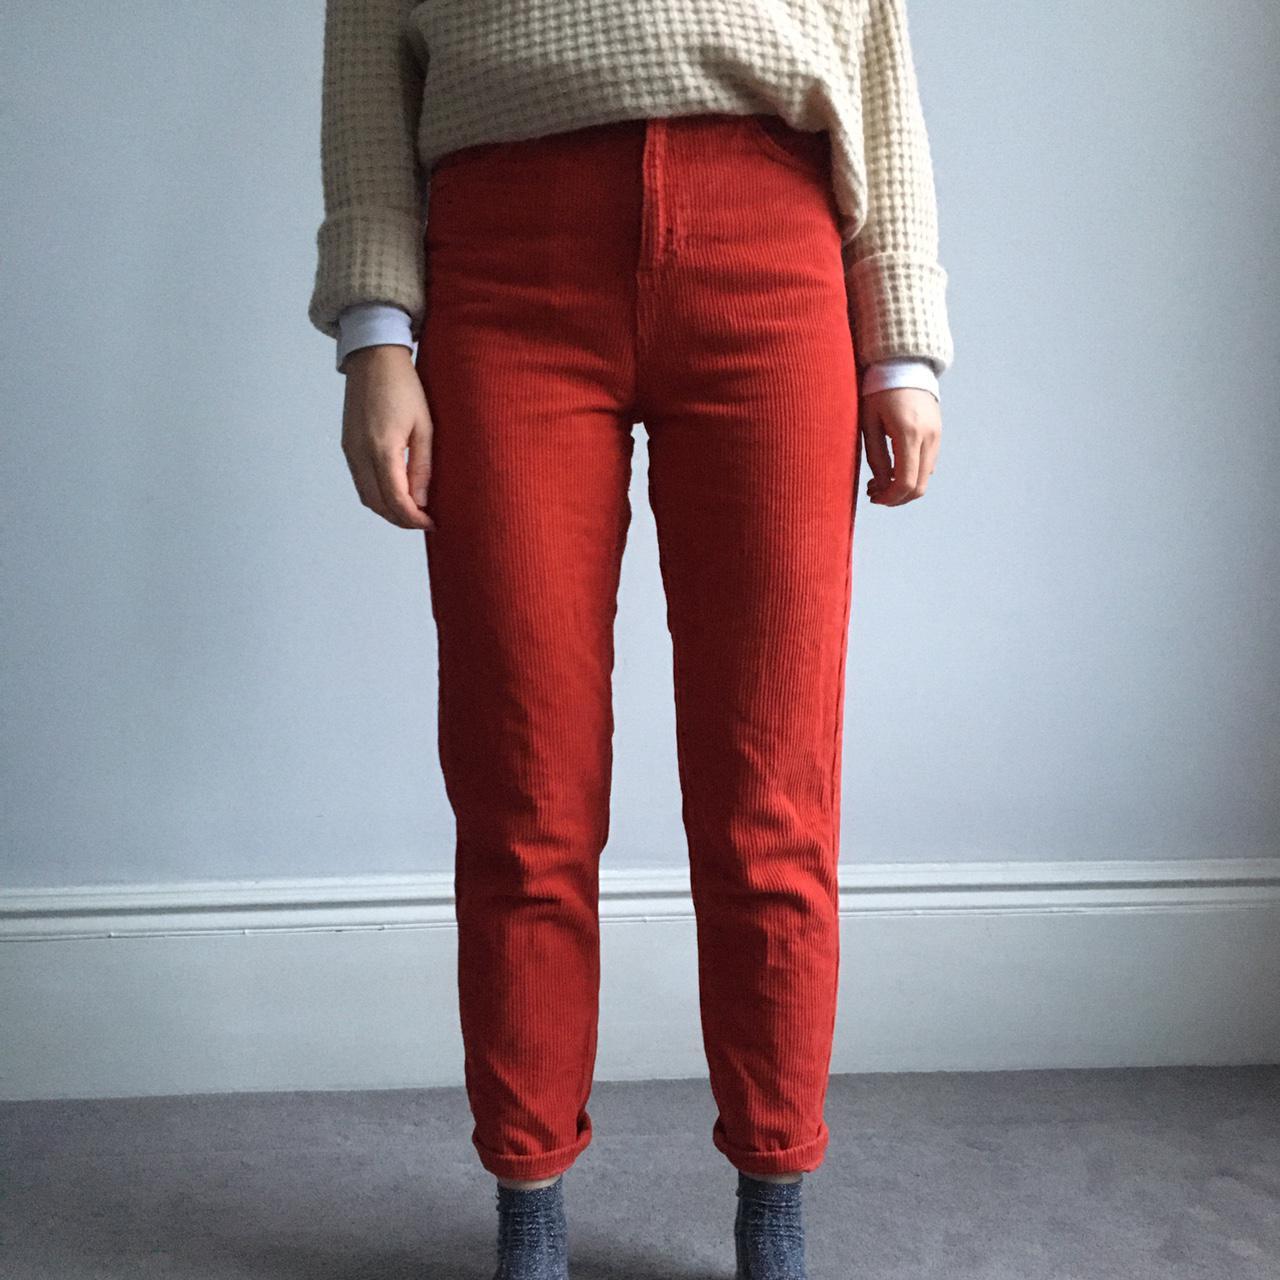 BDG Urban Outfitters Corduroy Mom Pants